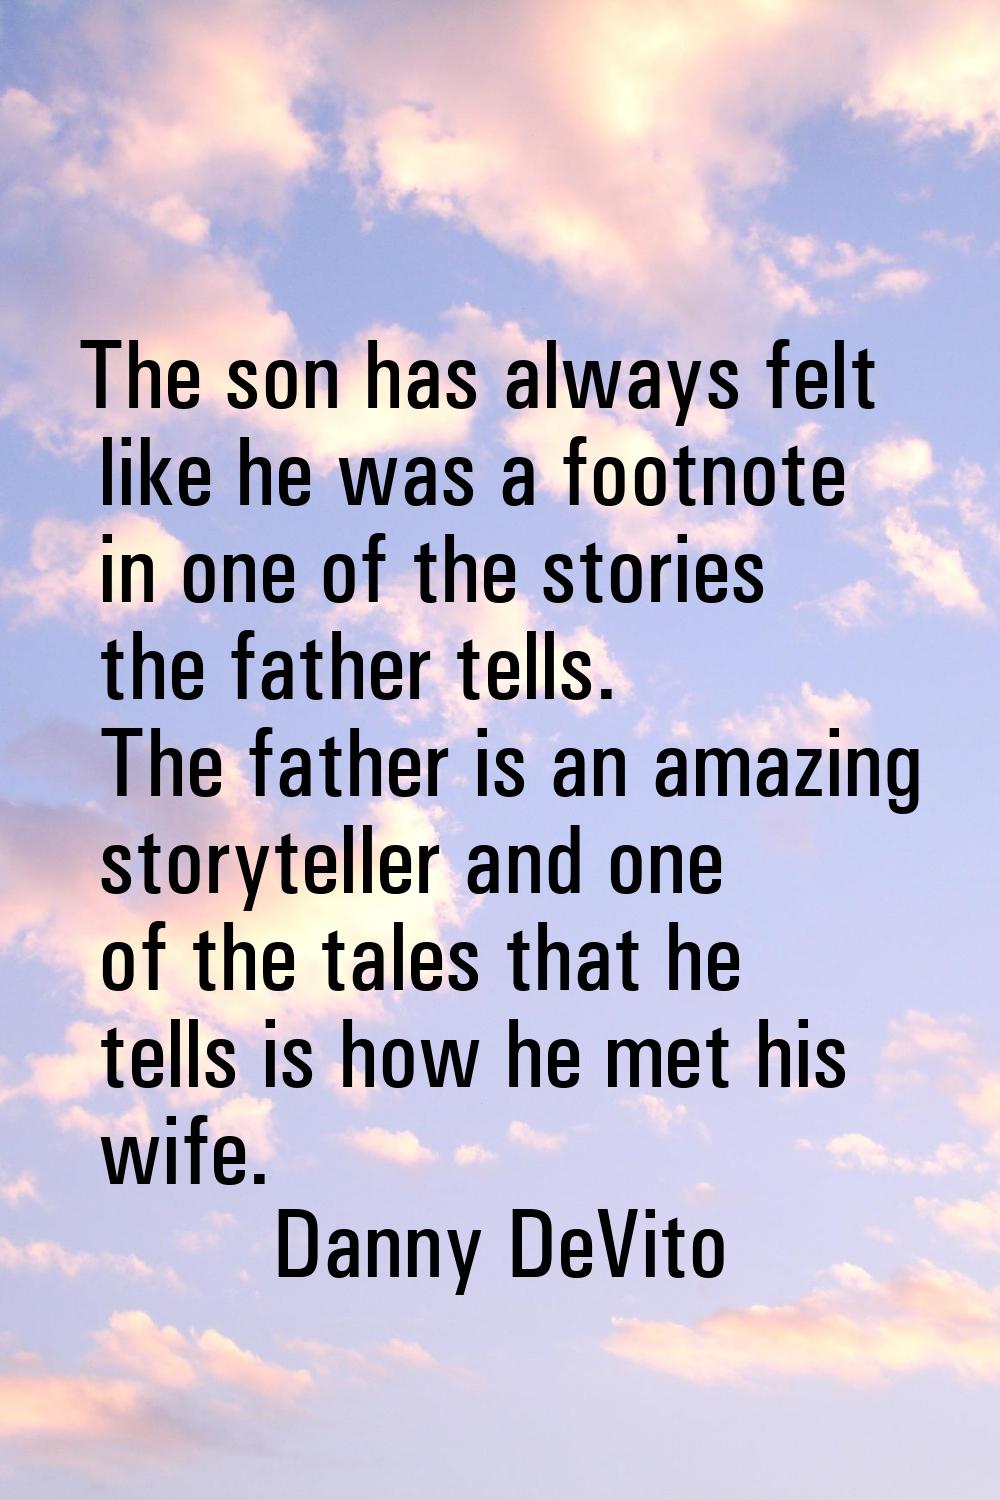 The son has always felt like he was a footnote in one of the stories the father tells. The father i